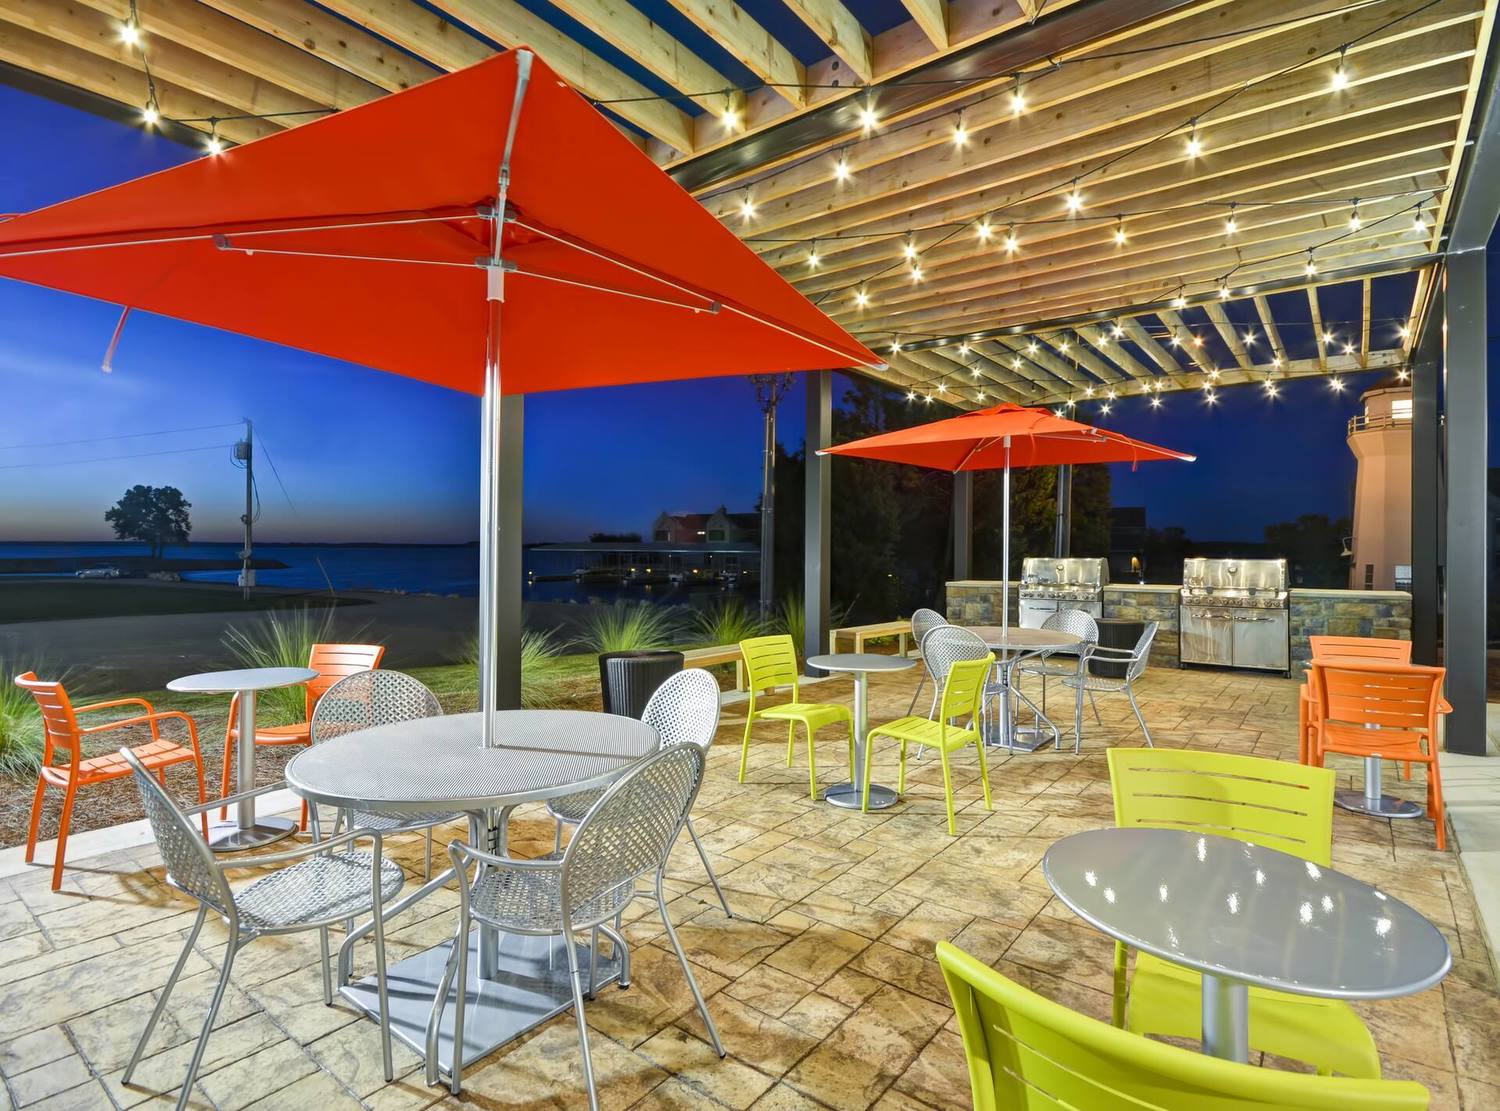 Outdoor Patio Grilling Station with Chairs, Umbrella Tables and Grills at Night